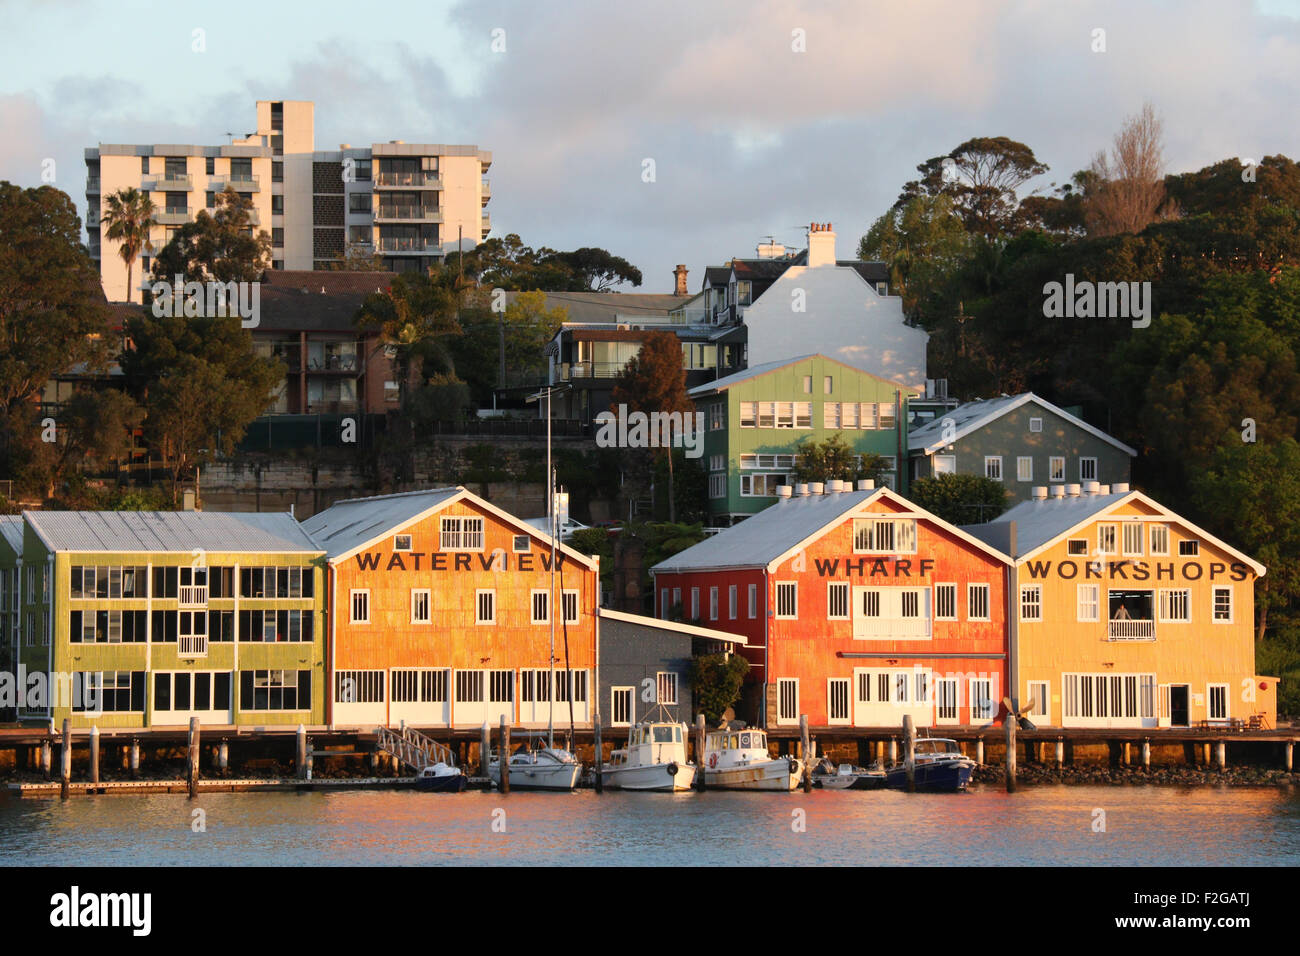 The colourful buildings of the Waterview Wharf Workshops in the Sydney suburb of Balmain. Stock Photo